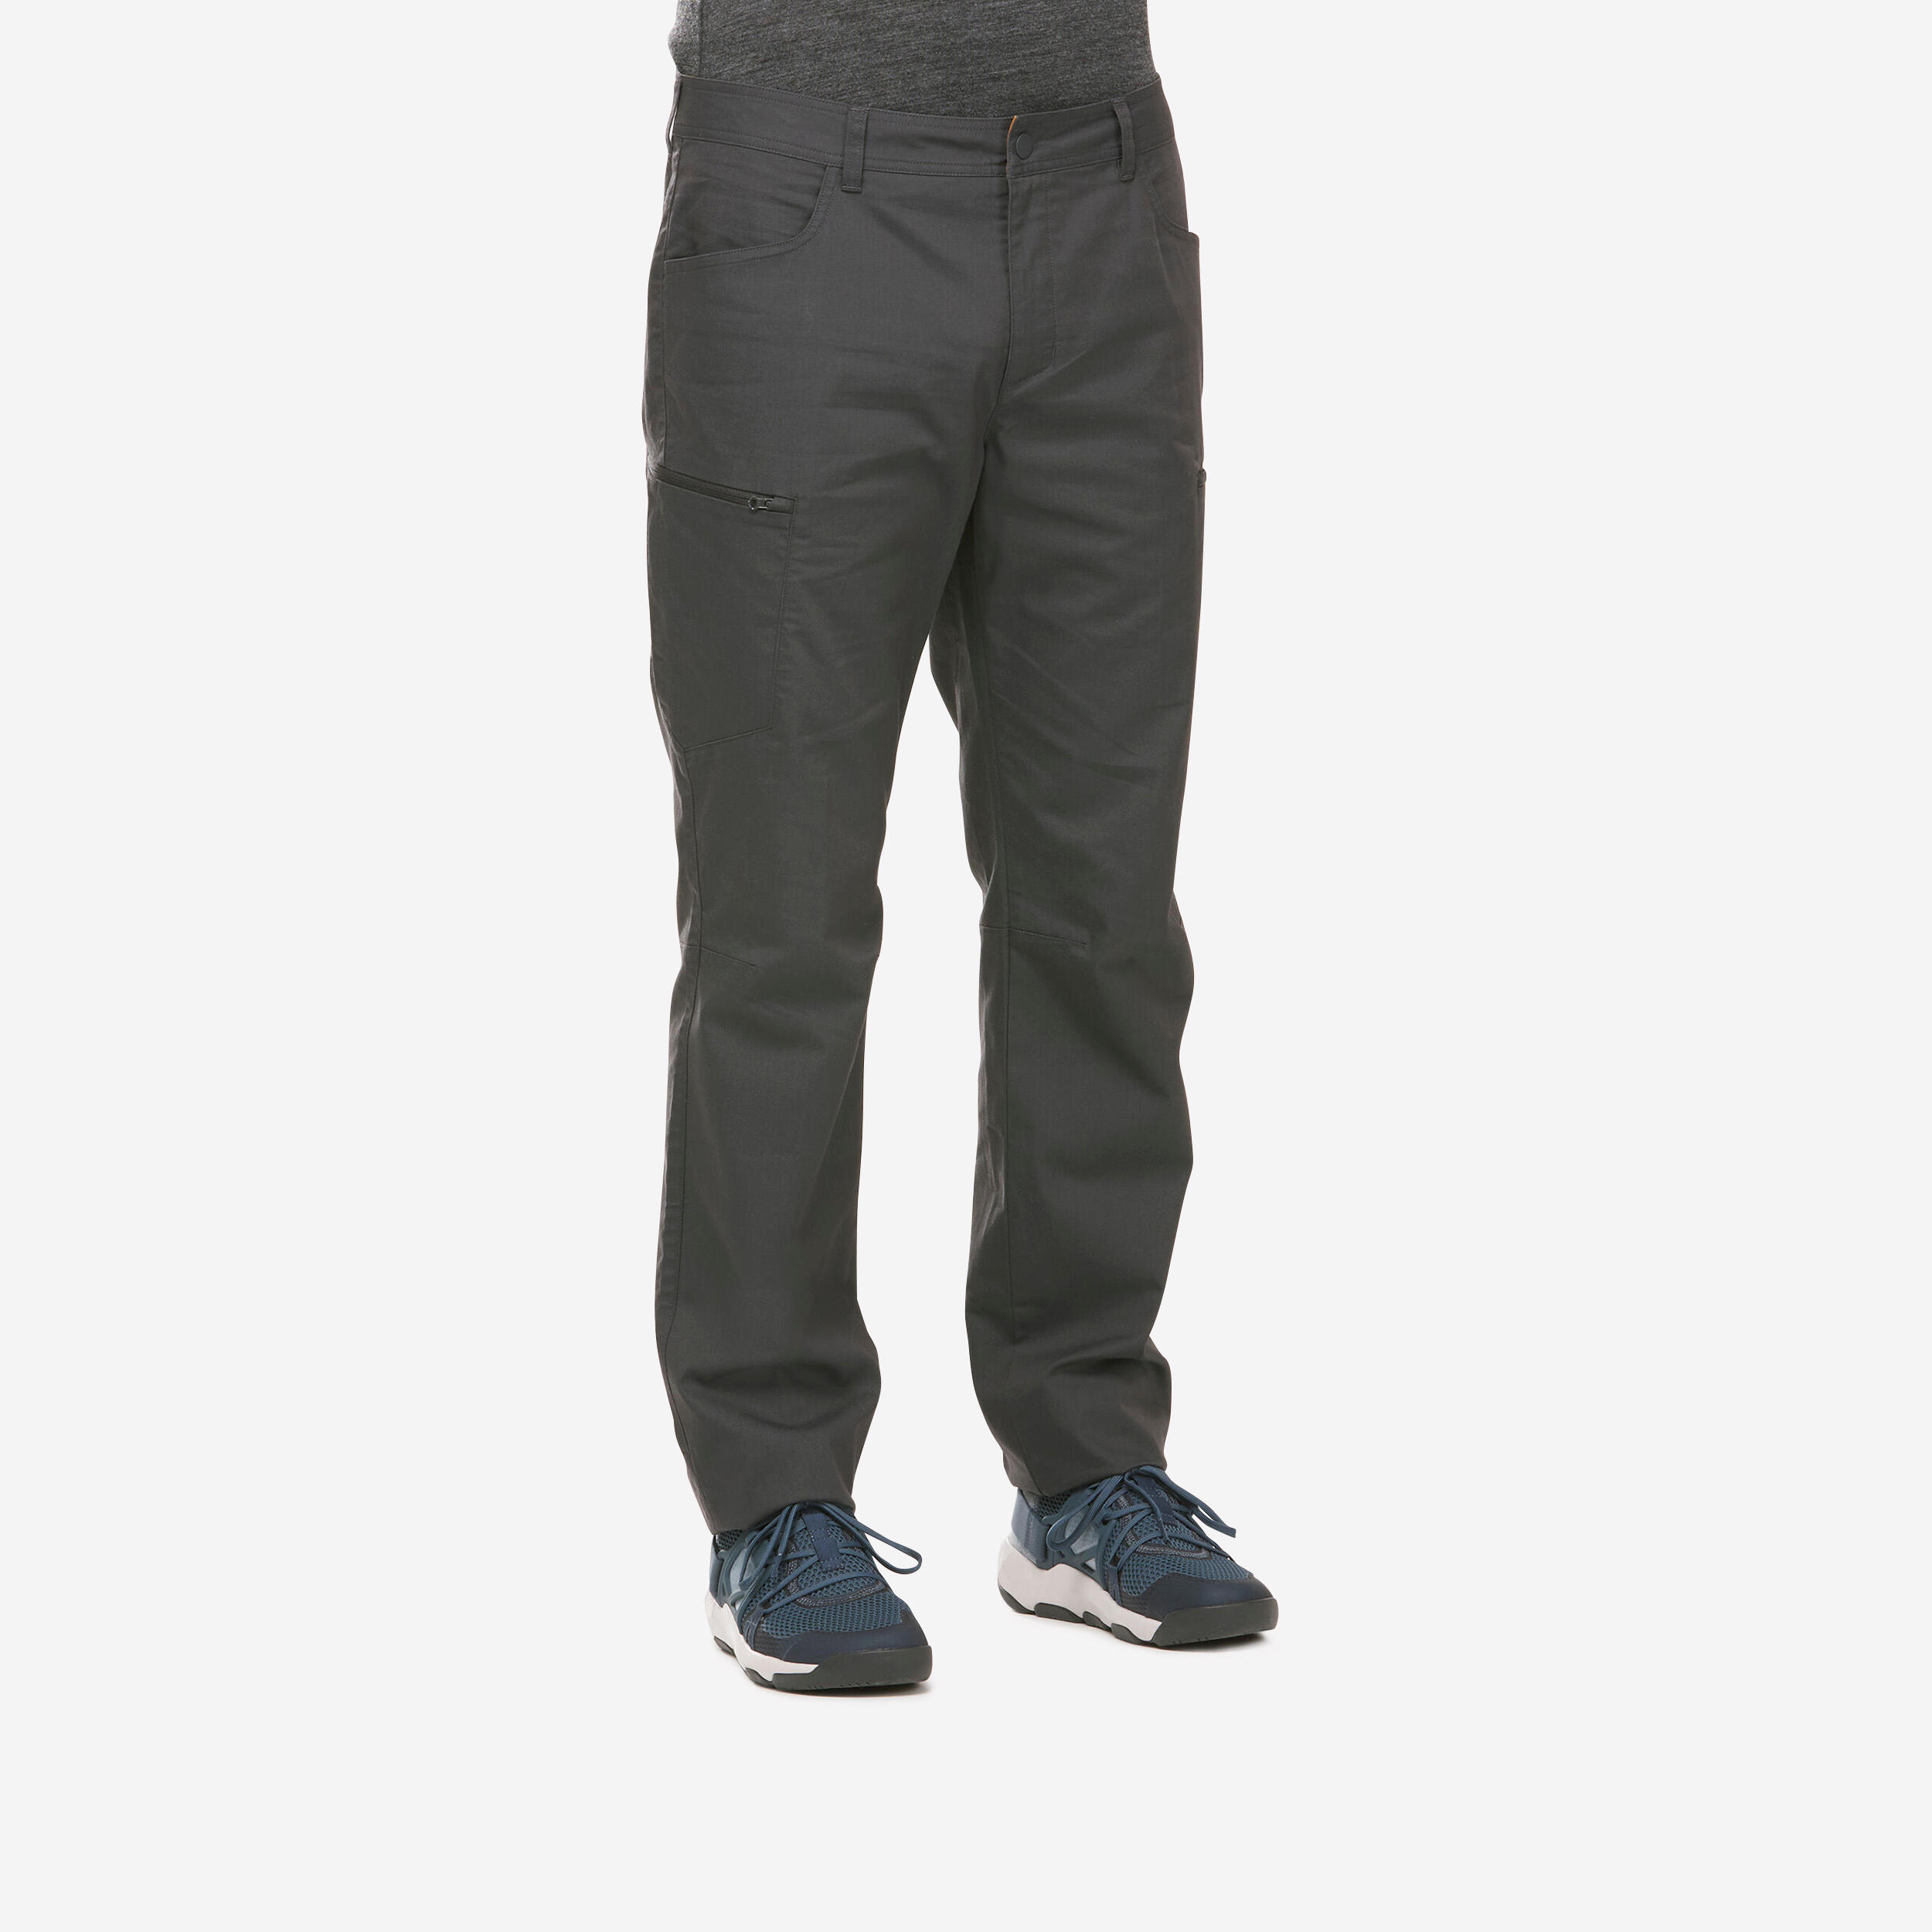 Buy Men's Waterproof Hiking Over Decathlon Trousers - NH500 Imper- Hiking,  Trekking, Riding Over Trousers- Black Color Decathlon Rain Pant- (Size:XL;  Numerical Size:36) - Street Studio at Amazon.in